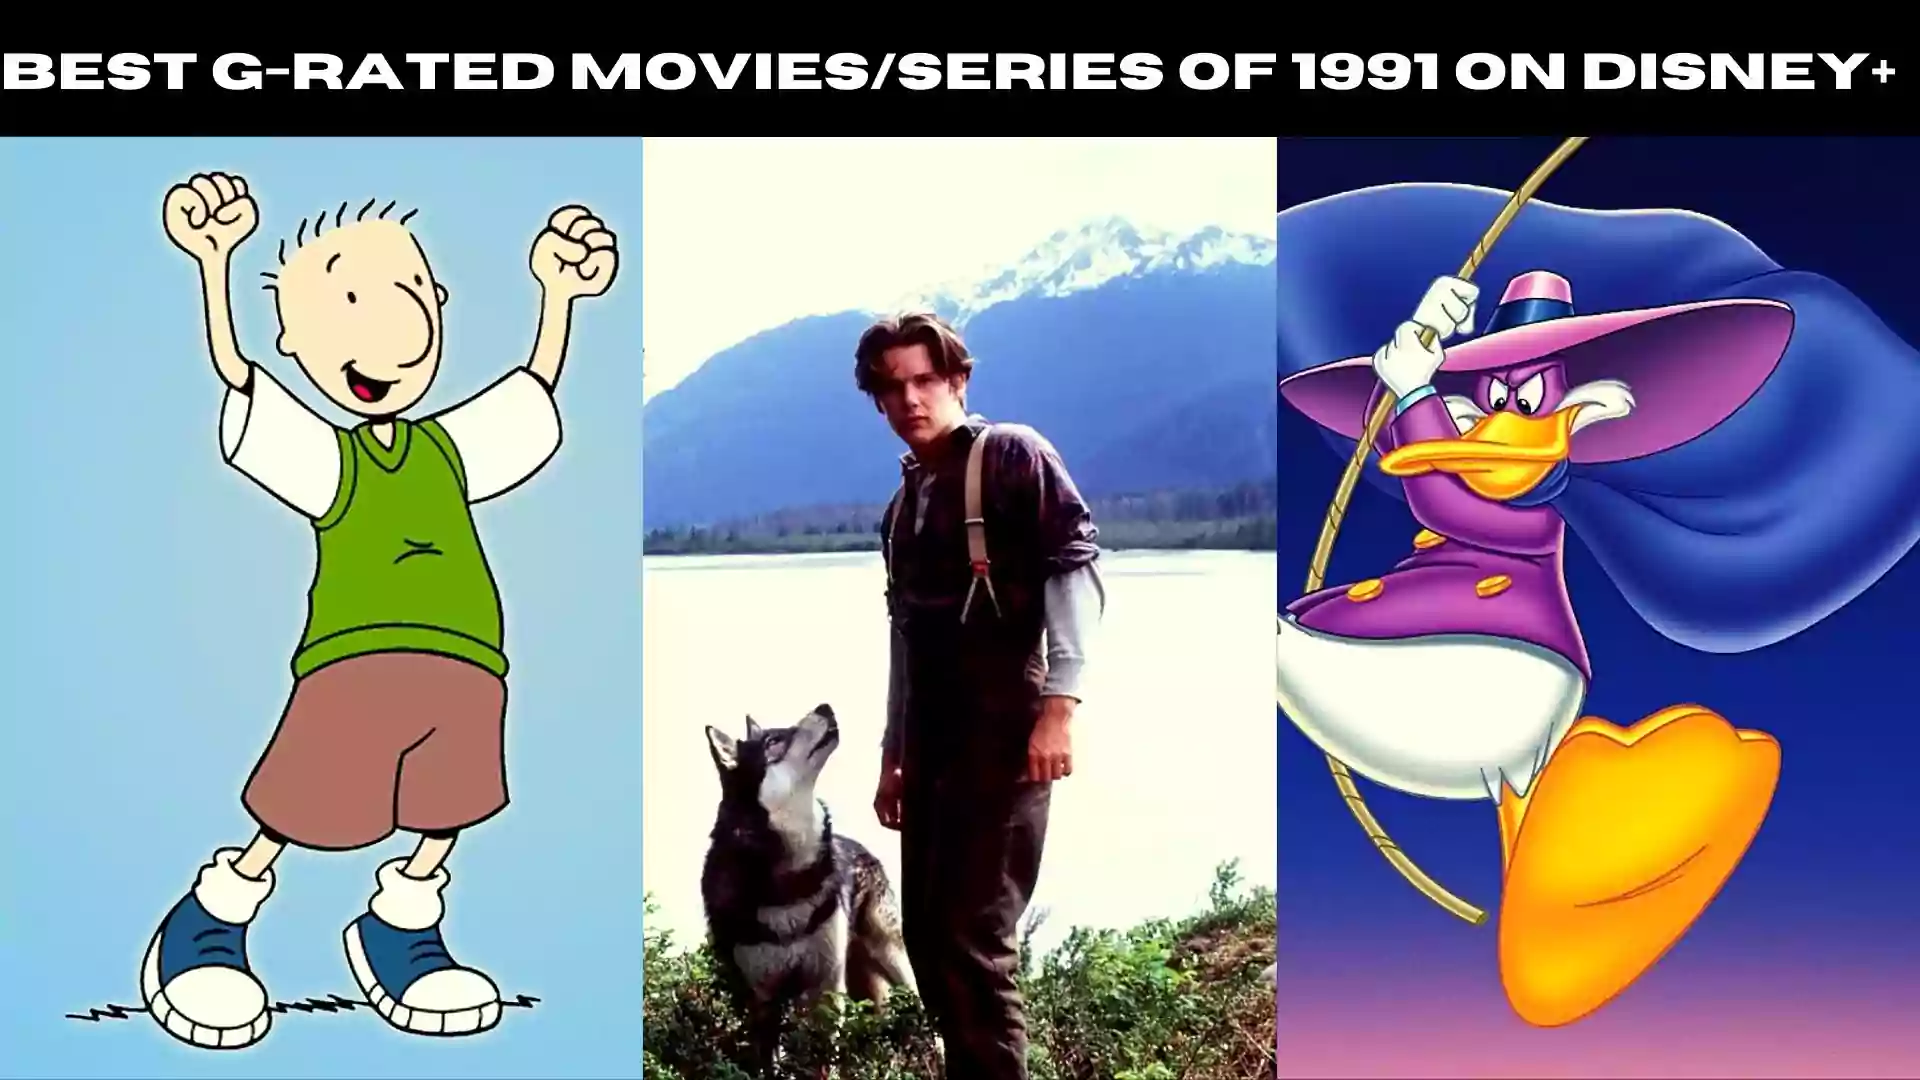 Best G-Rated Movies/series of 1991 on Disney+